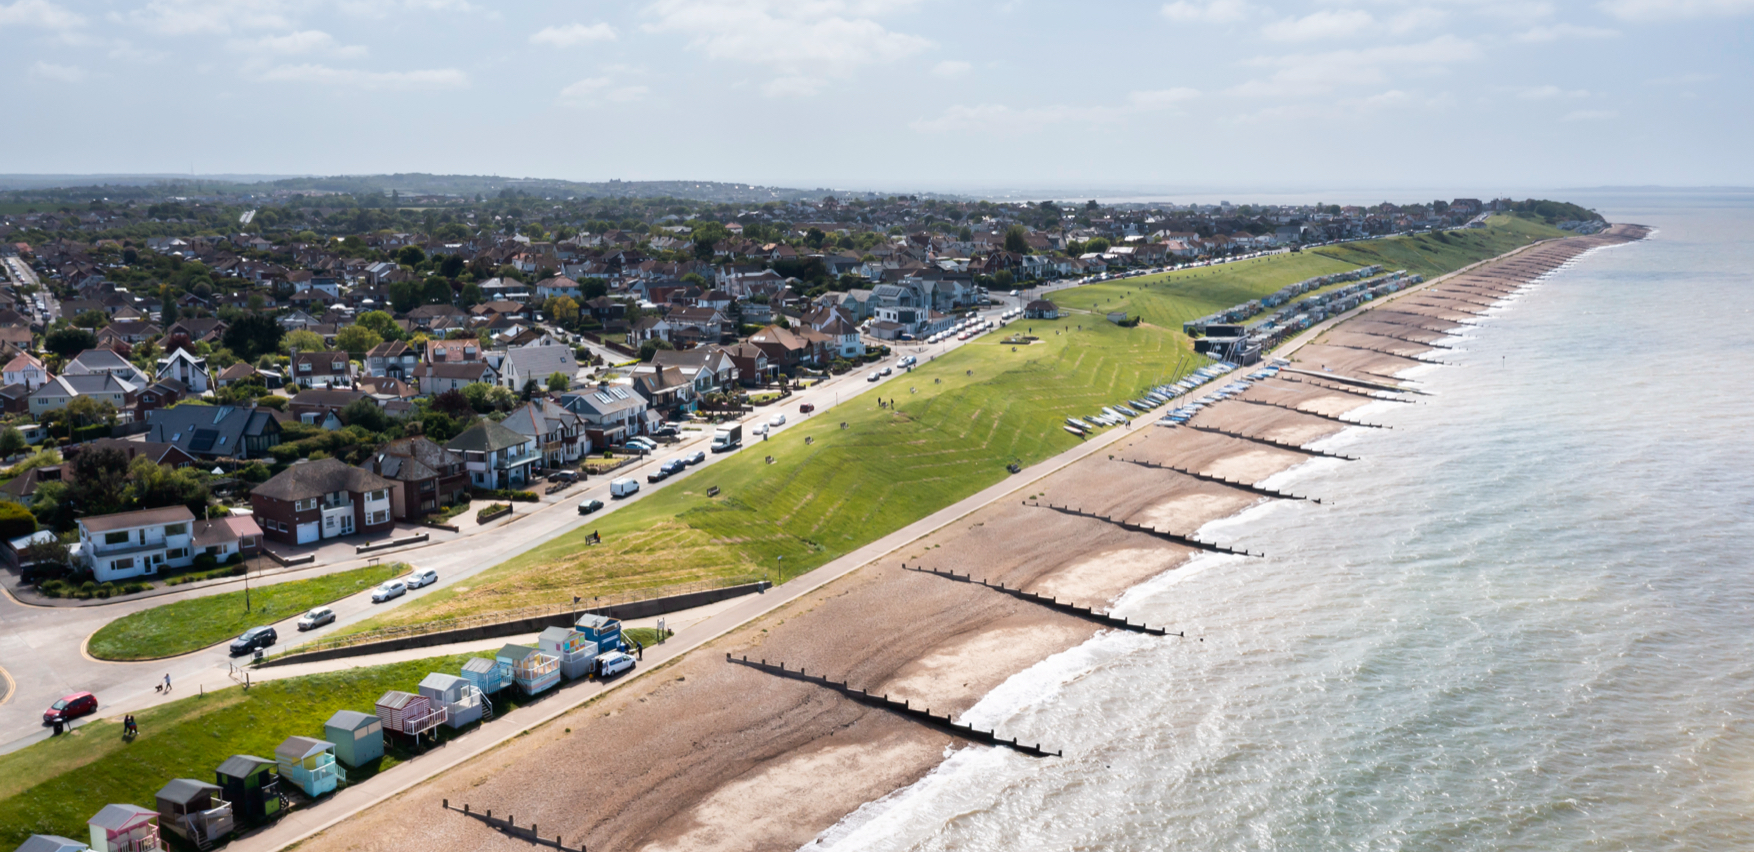 An aerial view of the coast of Whitstable 